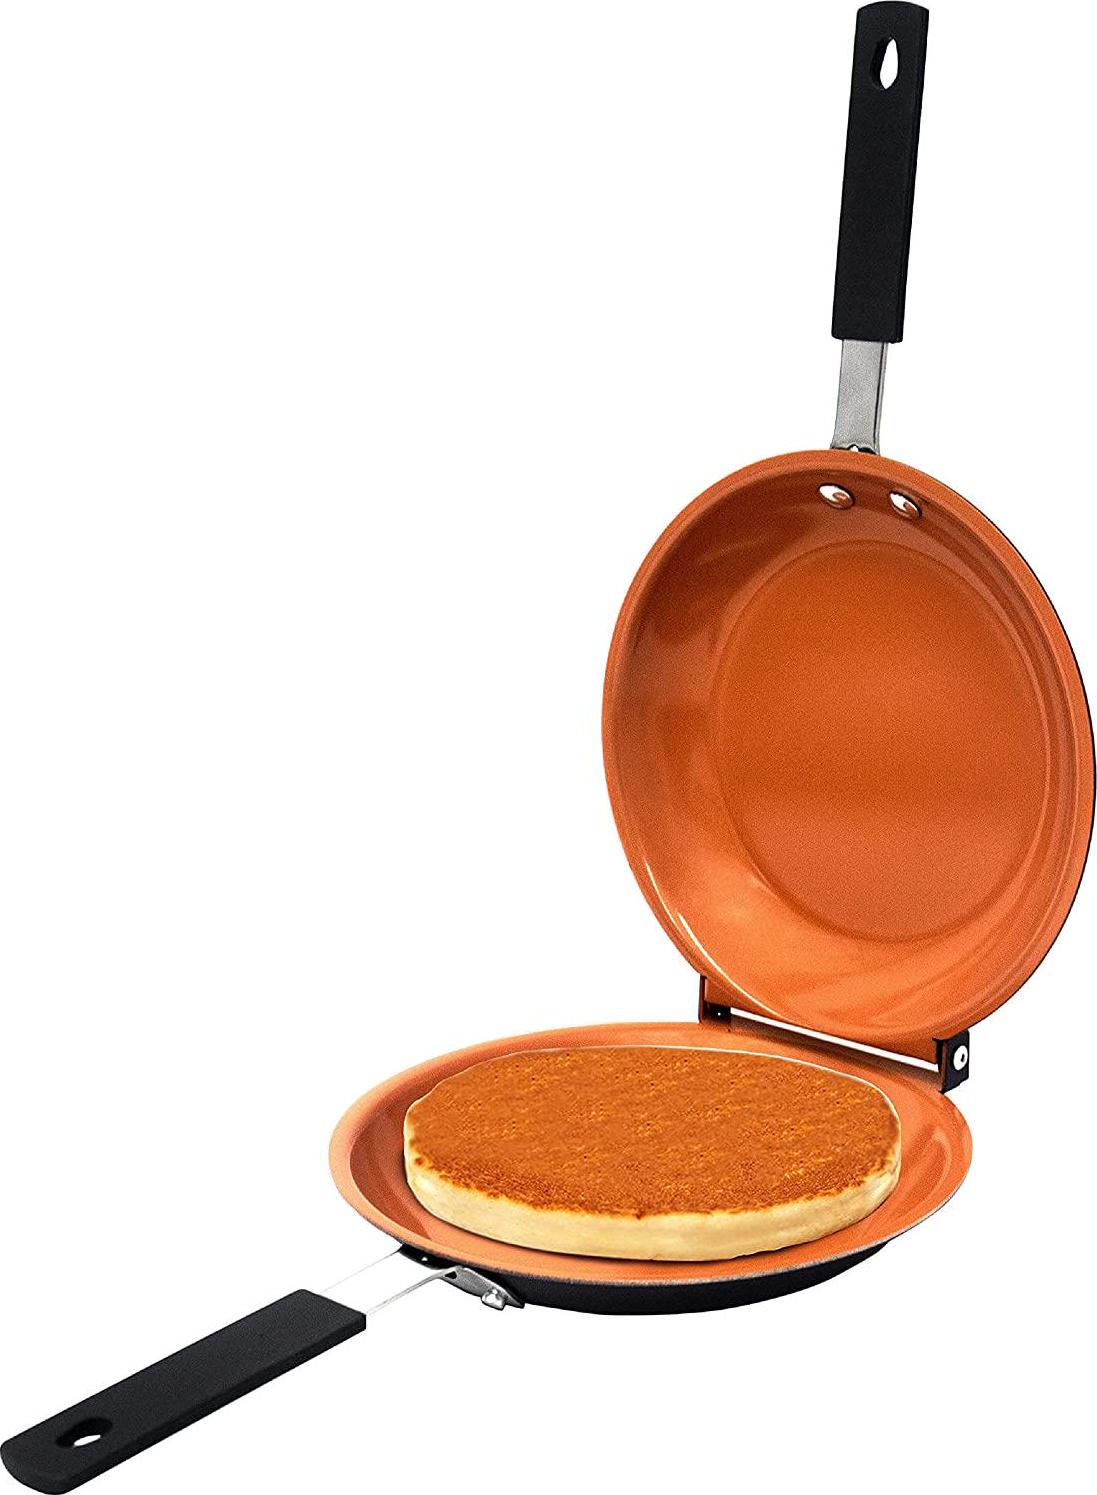 GOTHAM STEEL, Gotham Steel Double Pan, The Perfect Pancake Maker Nonstick Copper Easy to Flip Pan, Double Sided Frying Pan for Fluffy Pancakes, Omelets, Frittatas and More! Pancake Pan Dishwasher Safe